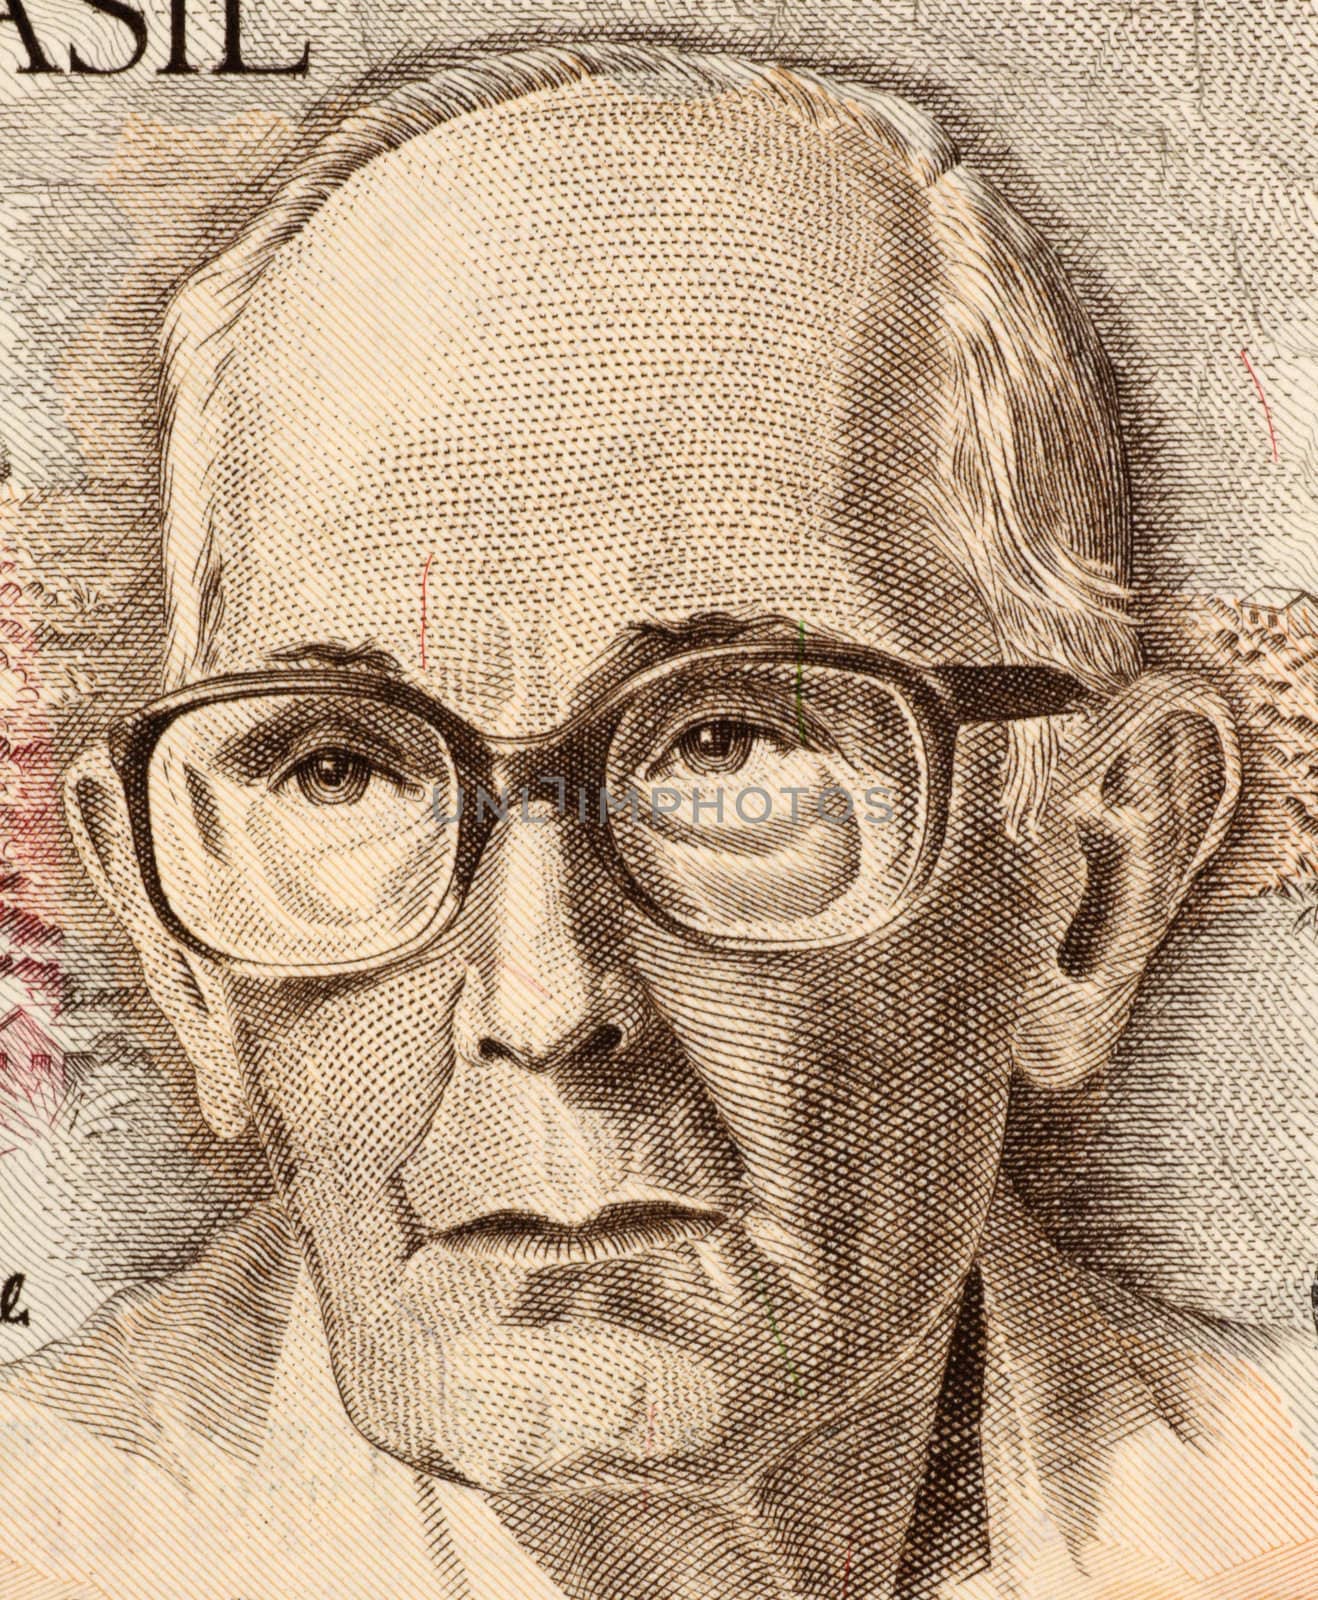 Drummond de Andrade on 50 Cruzados Novos 1989 Banknote from Brazil. Most influential Brazilian poet of the 20th century.